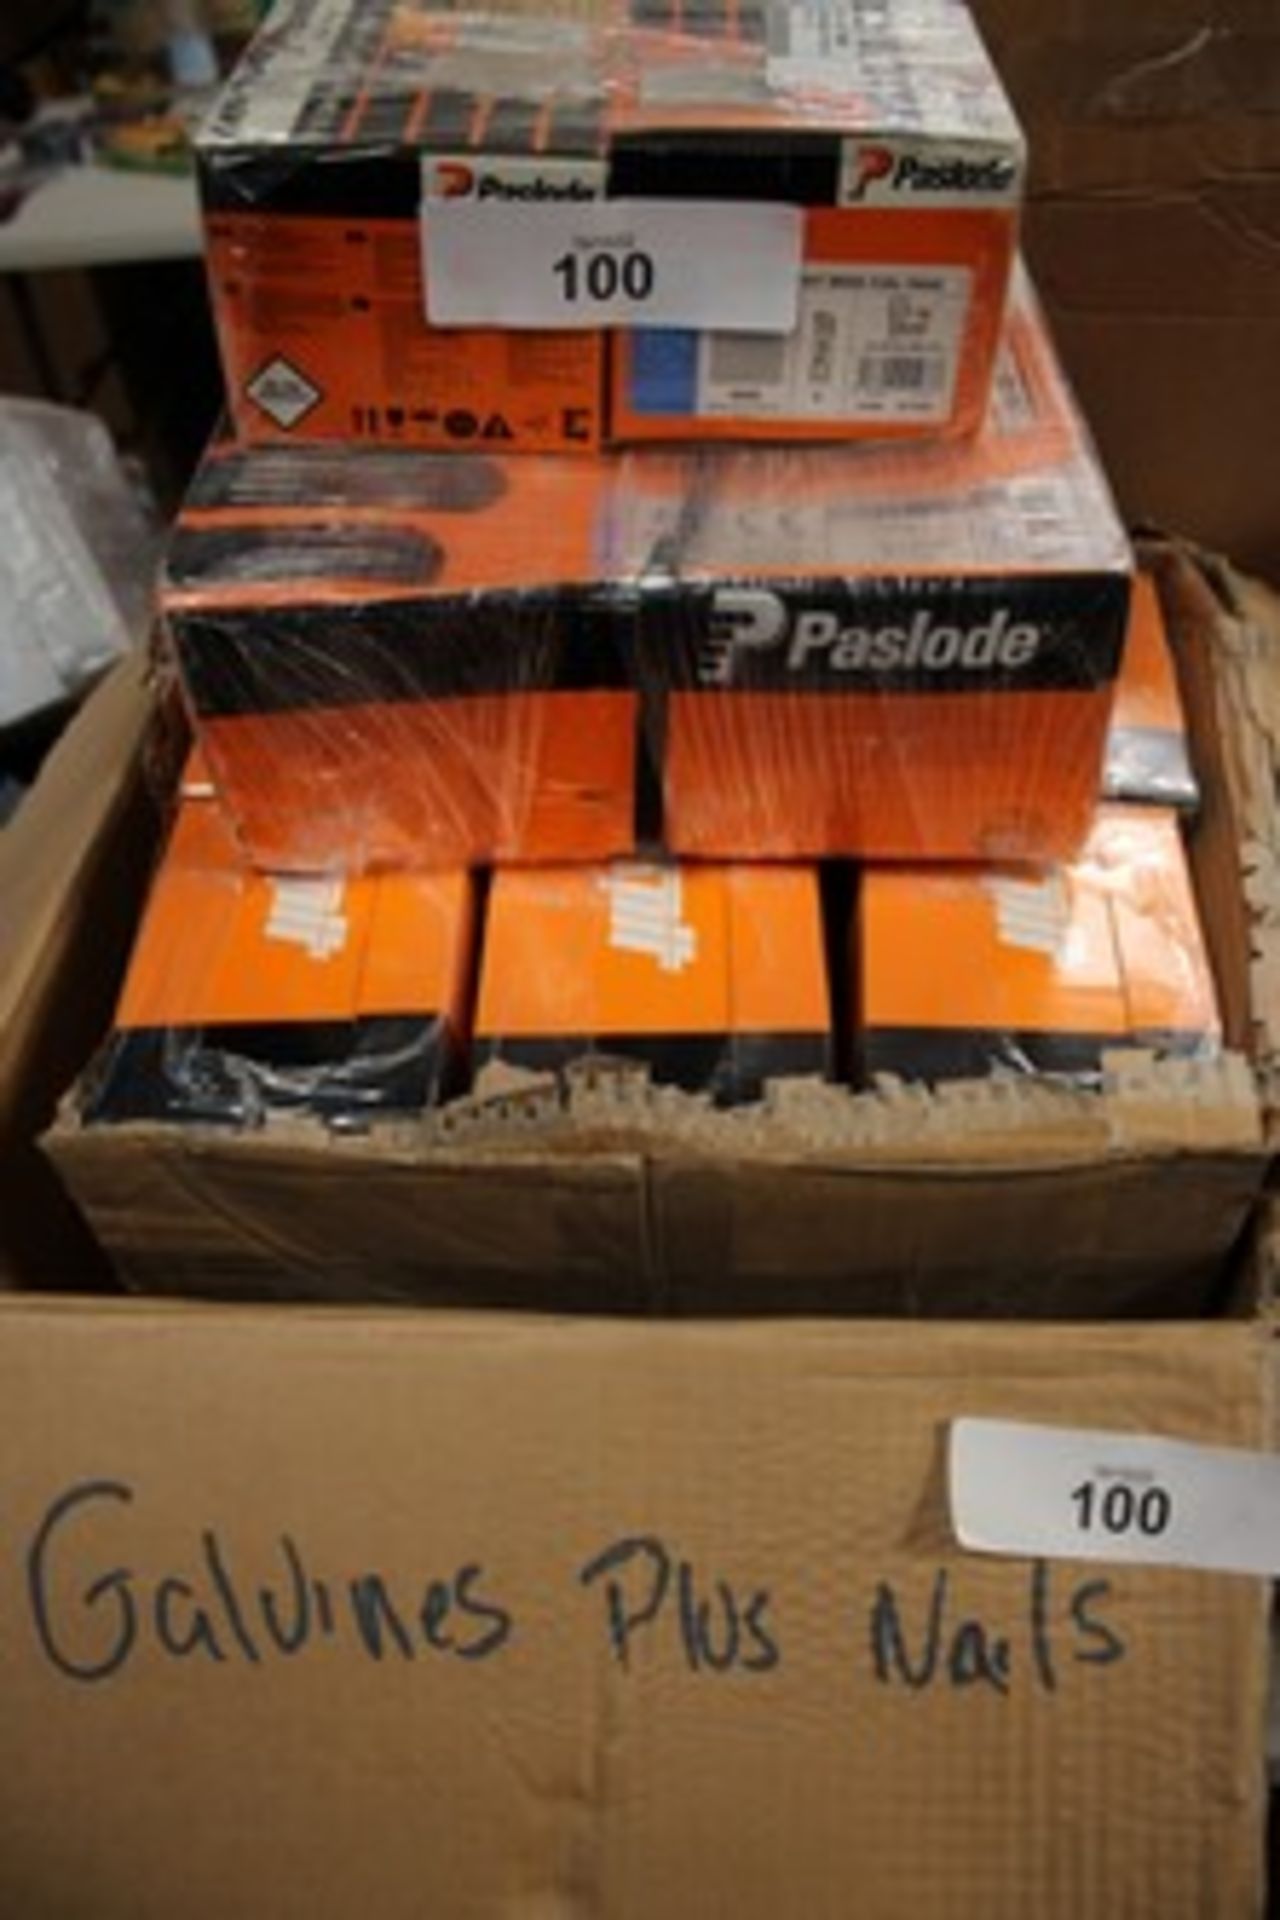 24 x boxes of 400 x spit plasterboard anchors, together with 1 x box of Paslode IM350 2.8mm x 51mm